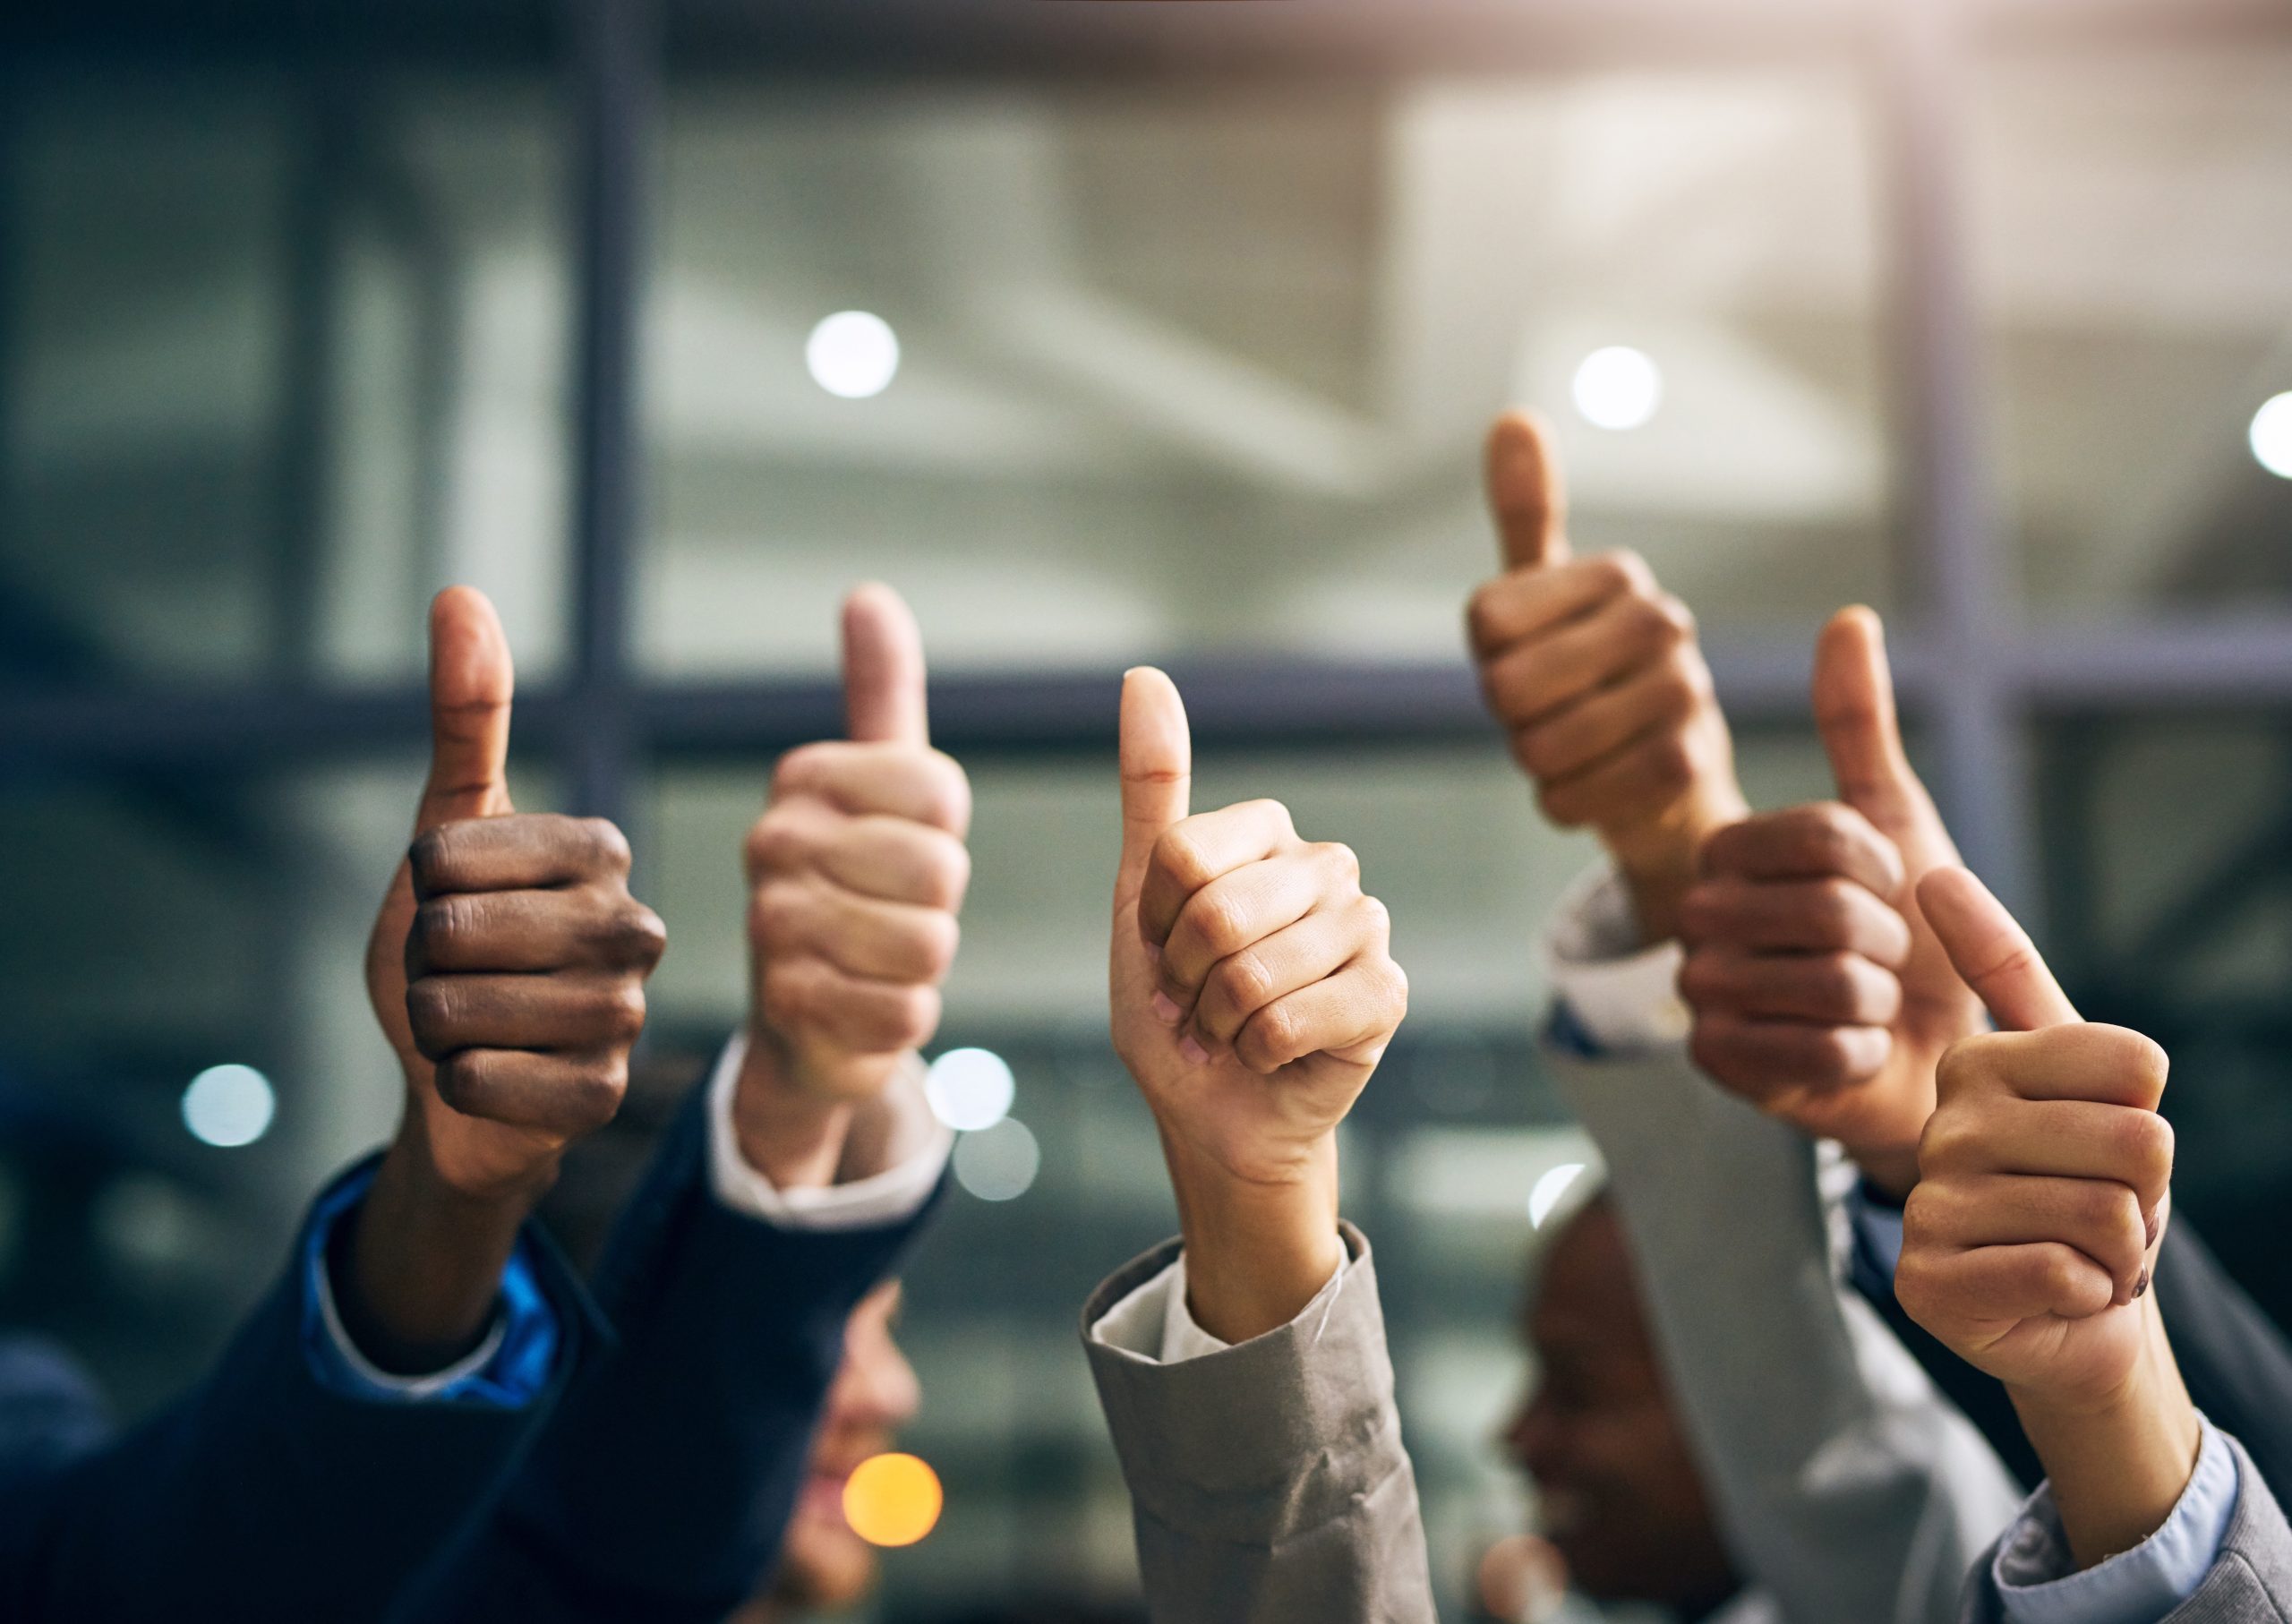 Hands showing thumbs up with business men endorsing, giving approval or saying thank you as a team in the office.